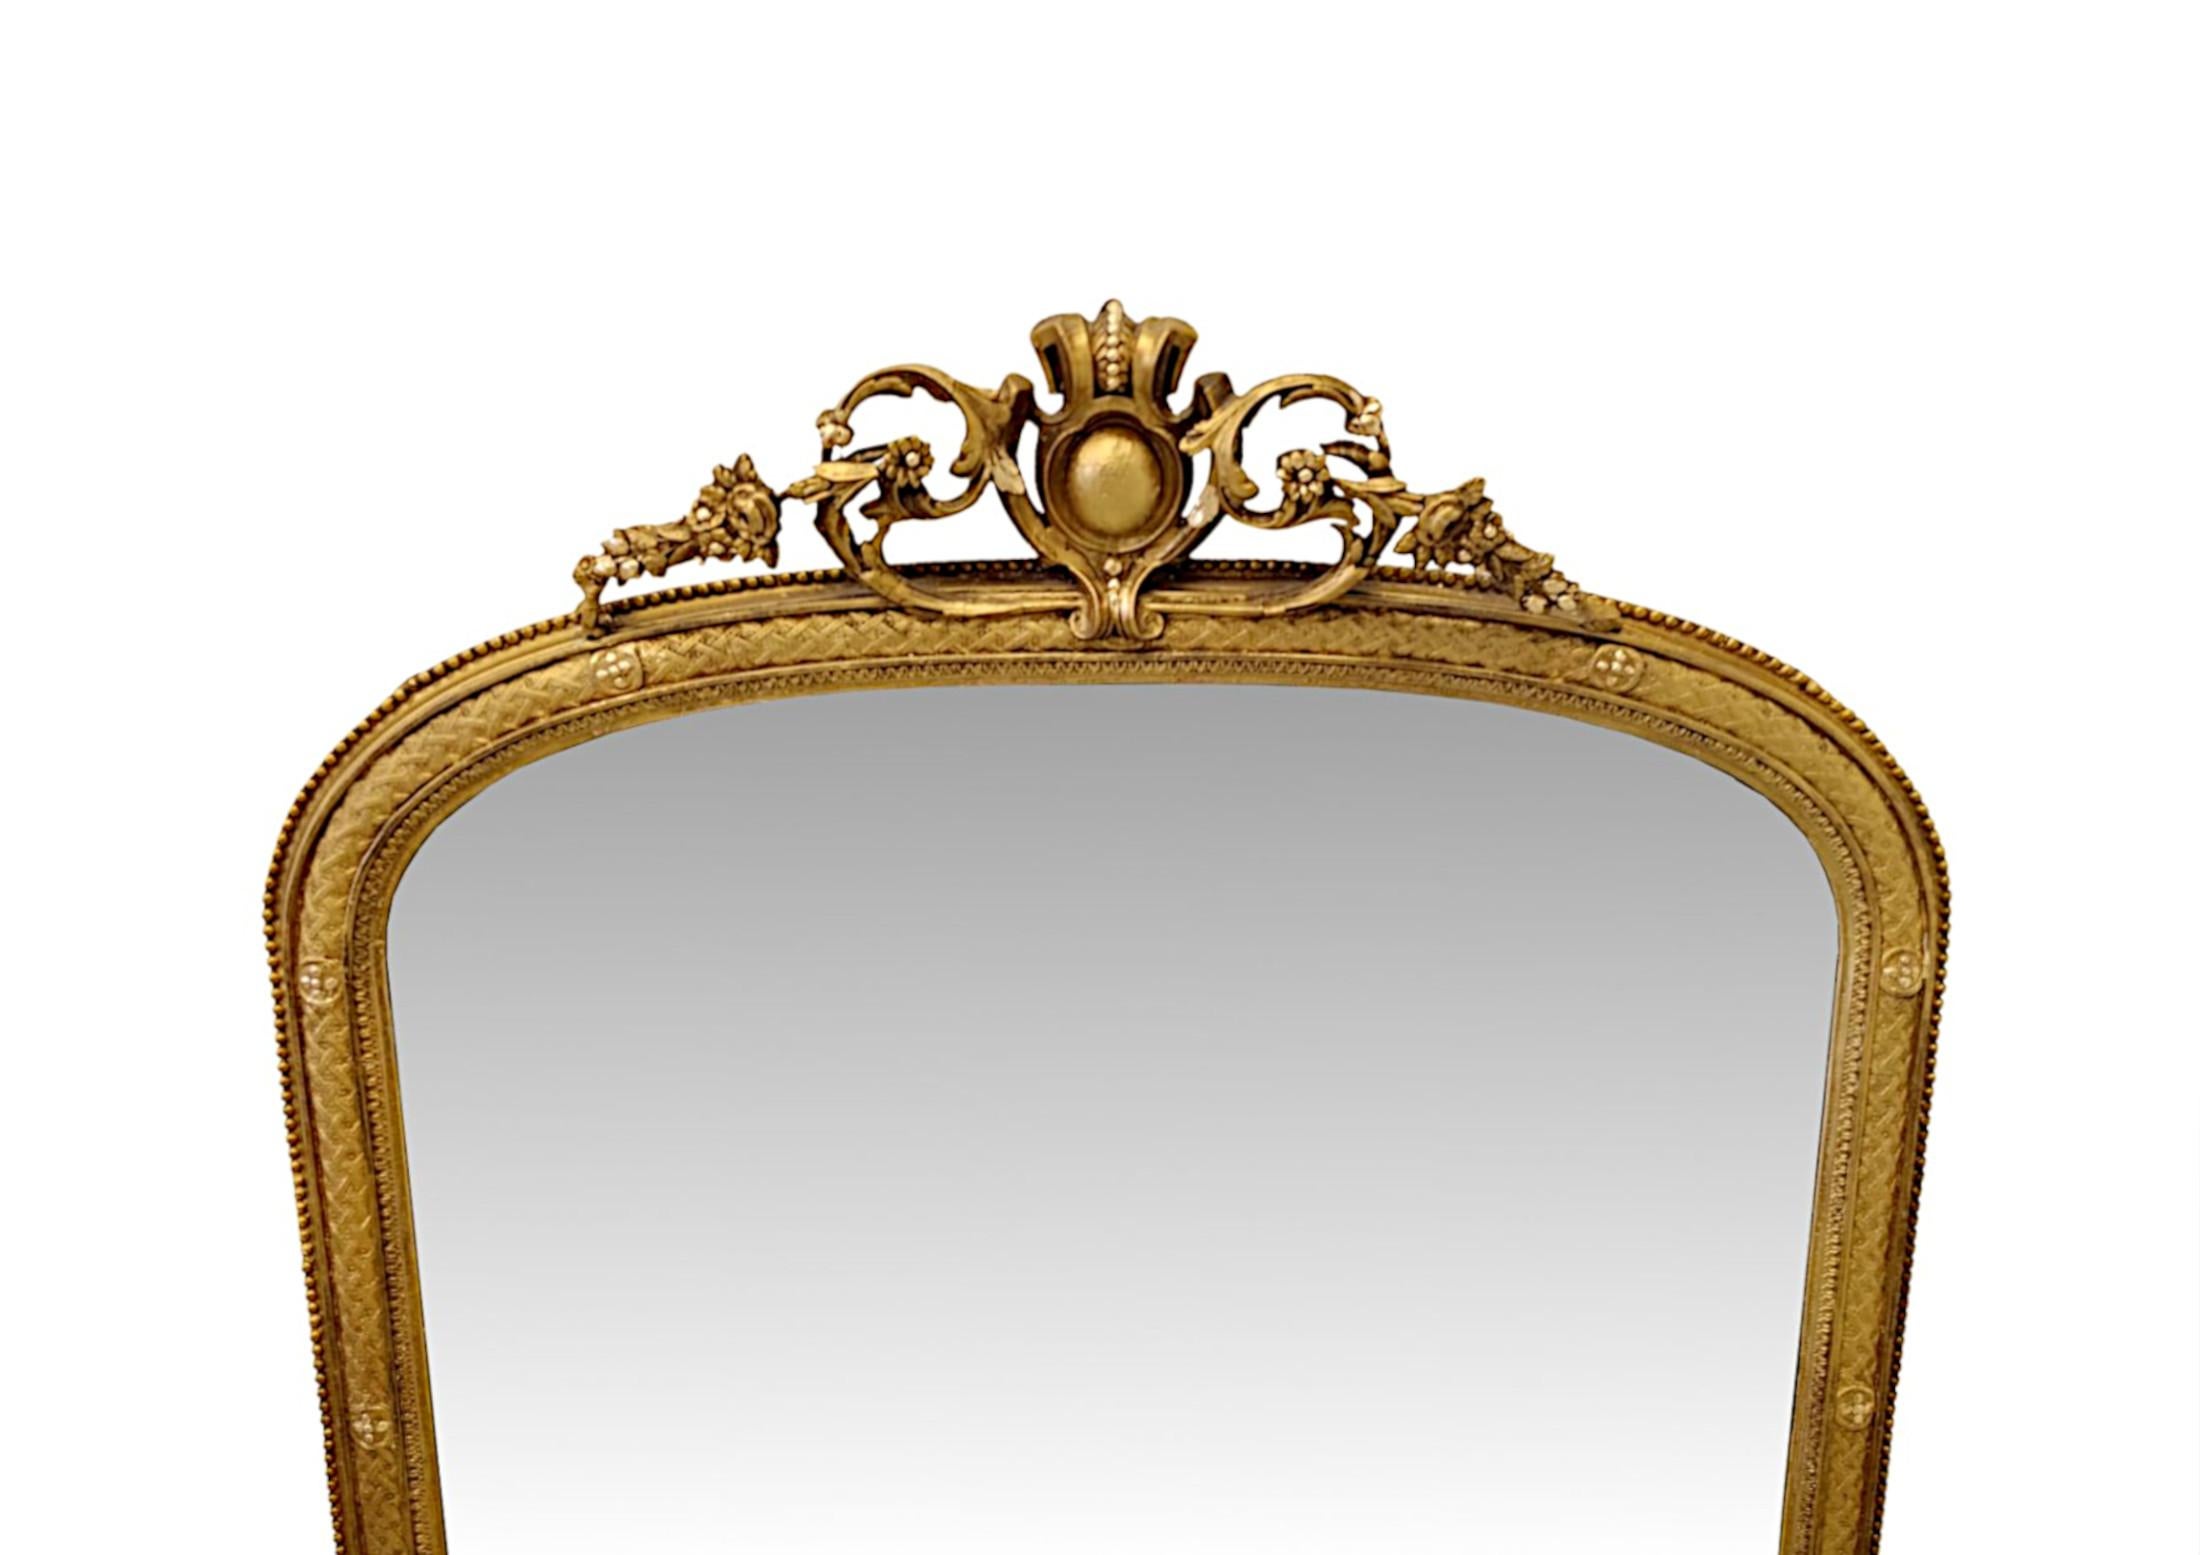 A fabulous 19th Century giltwood overmantel mirror finely hand carved and of exceptional quality.  The mirror glass plate of archtop form is set within a stunning moulded and fluted giltwood frame with elegantly simple alternating borders of lambs